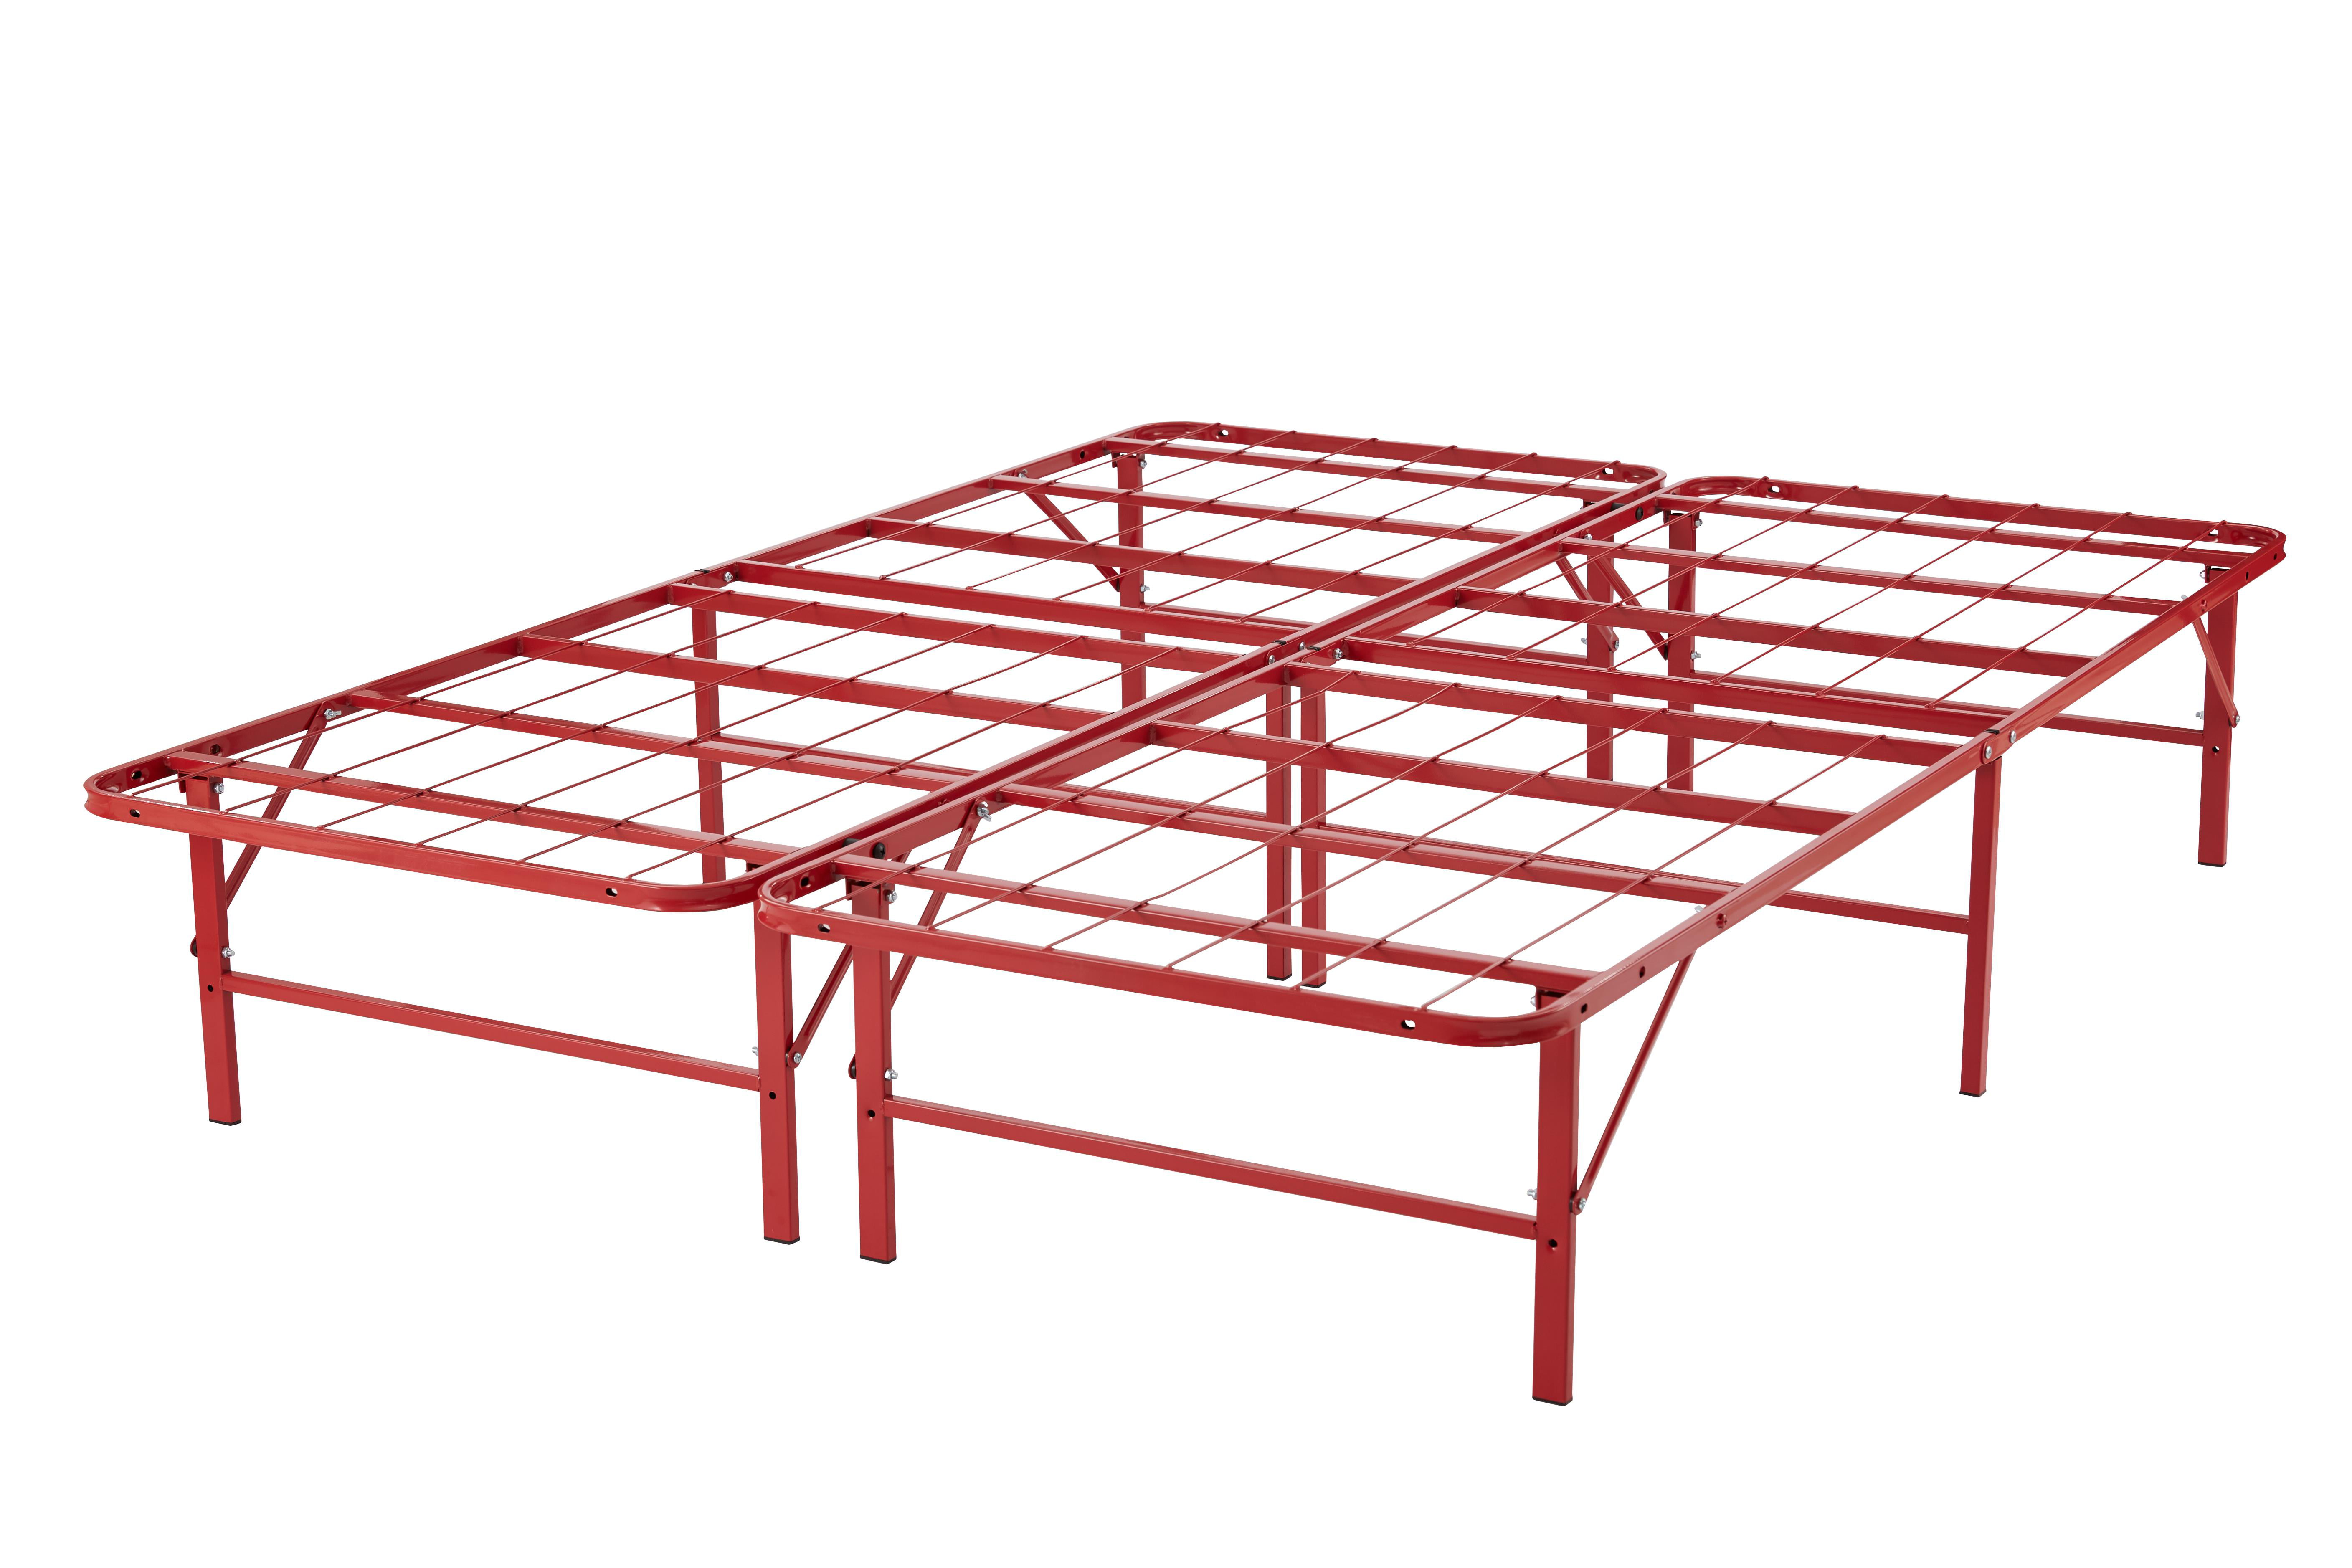 Naomi Home Idealbase 14 Foldable Metal, Foldable Metal Bed Frame Twin Xl